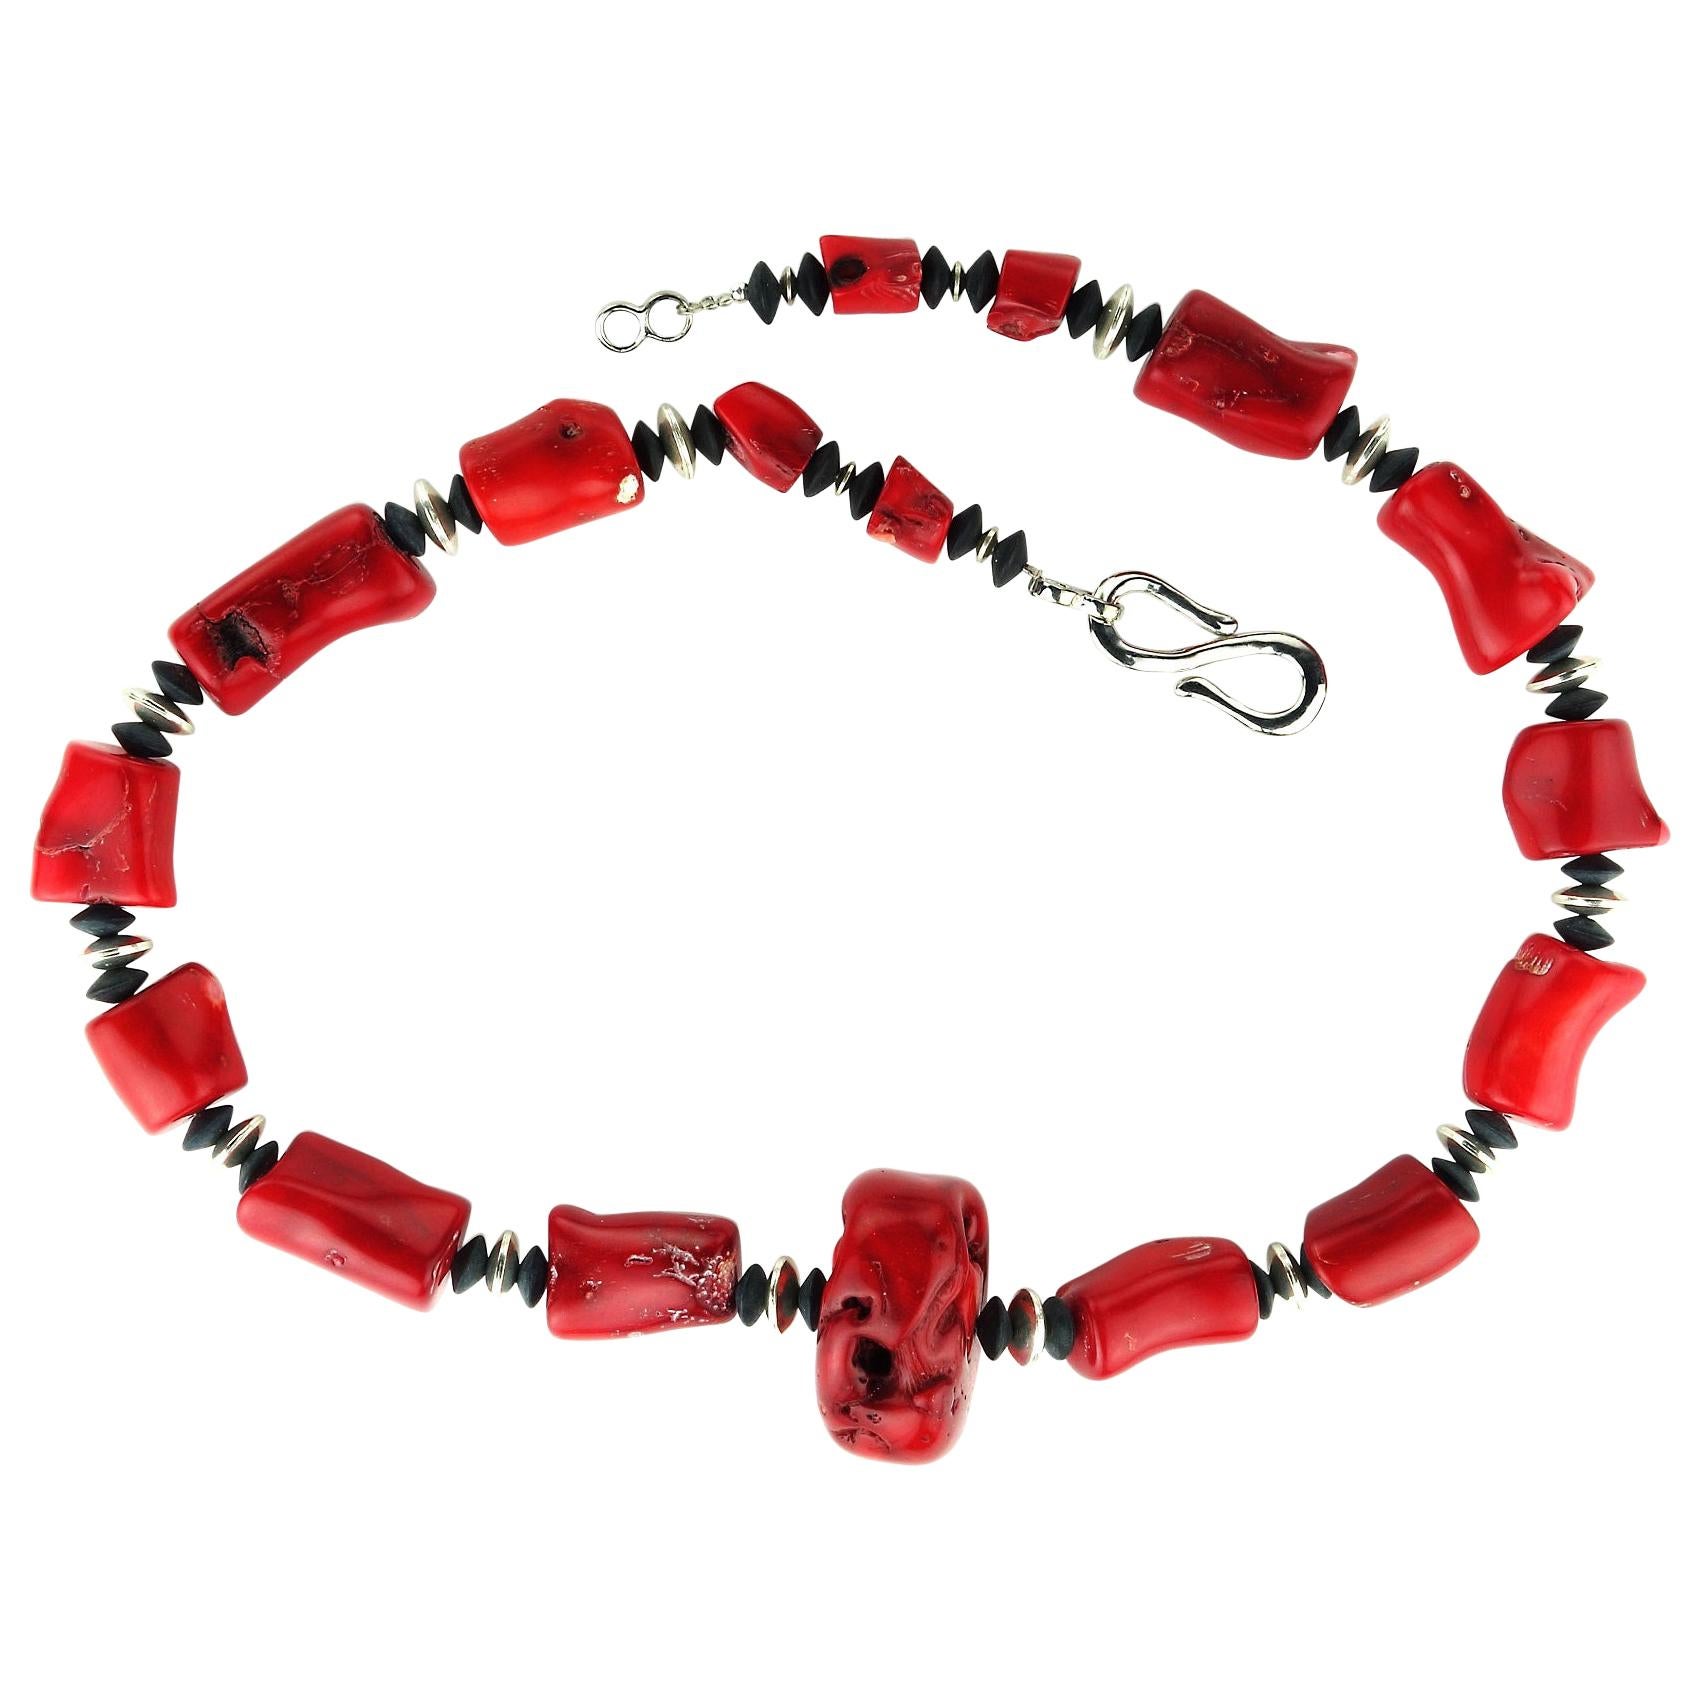 Feel Great in Red! Red Bamboo Coral Necklace with Accents of Black Onyx and Silver Tone Beads. One large Bamboo Coral Focal (37x33mm) graces the center of this Statement necklace. The Rich Red Bamboo Coral is striking and so well balanced with the